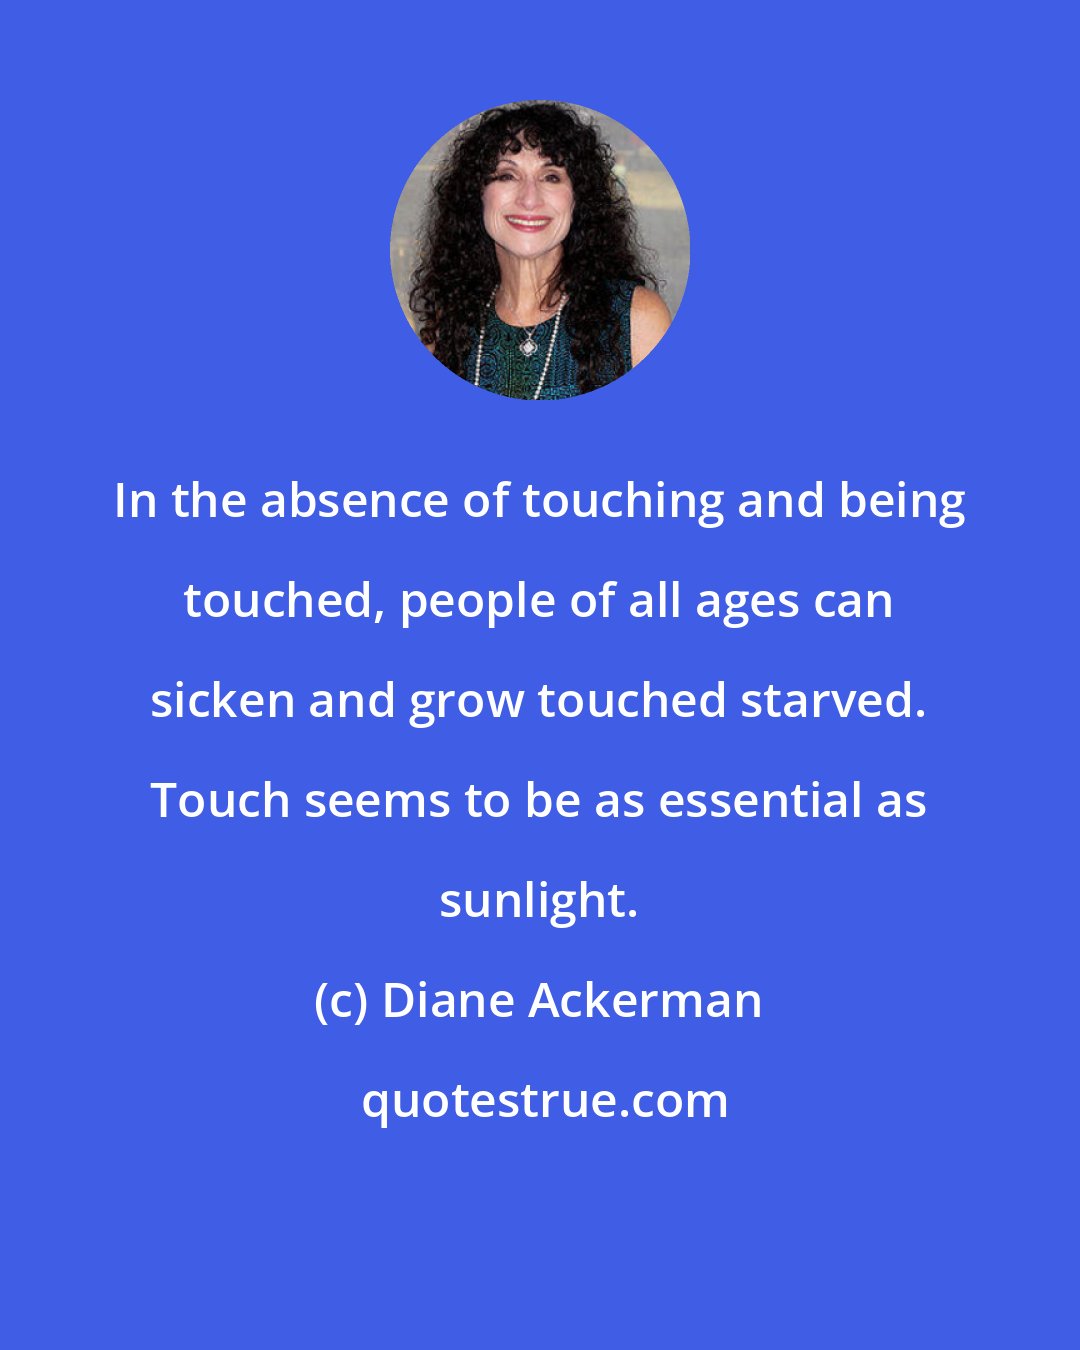 Diane Ackerman: In the absence of touching and being touched, people of all ages can sicken and grow touched starved. Touch seems to be as essential as sunlight.